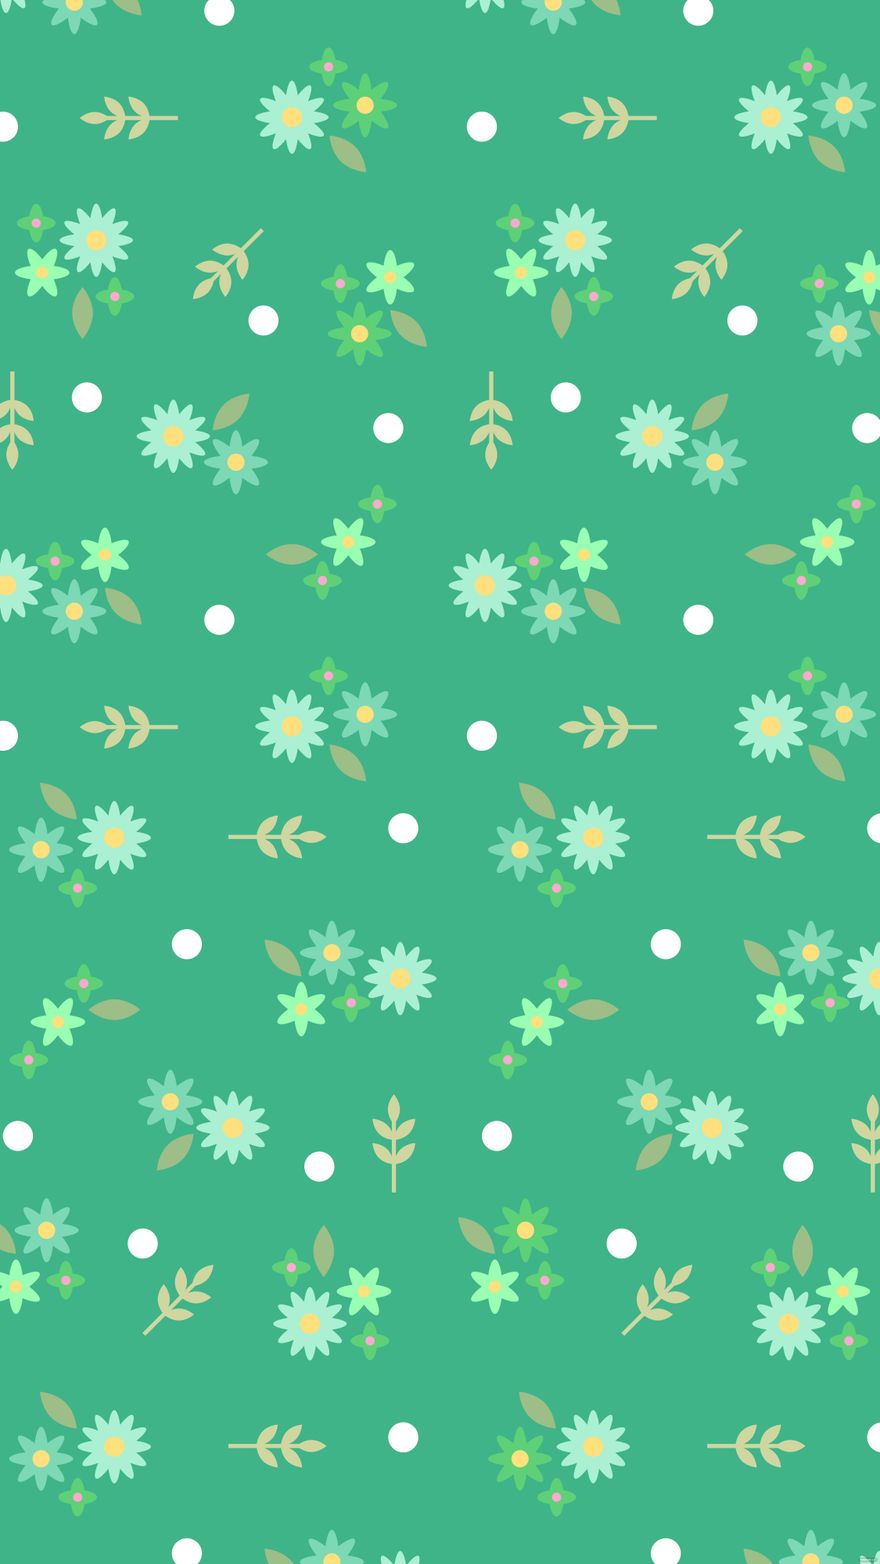 Free Mint Green Floral Background